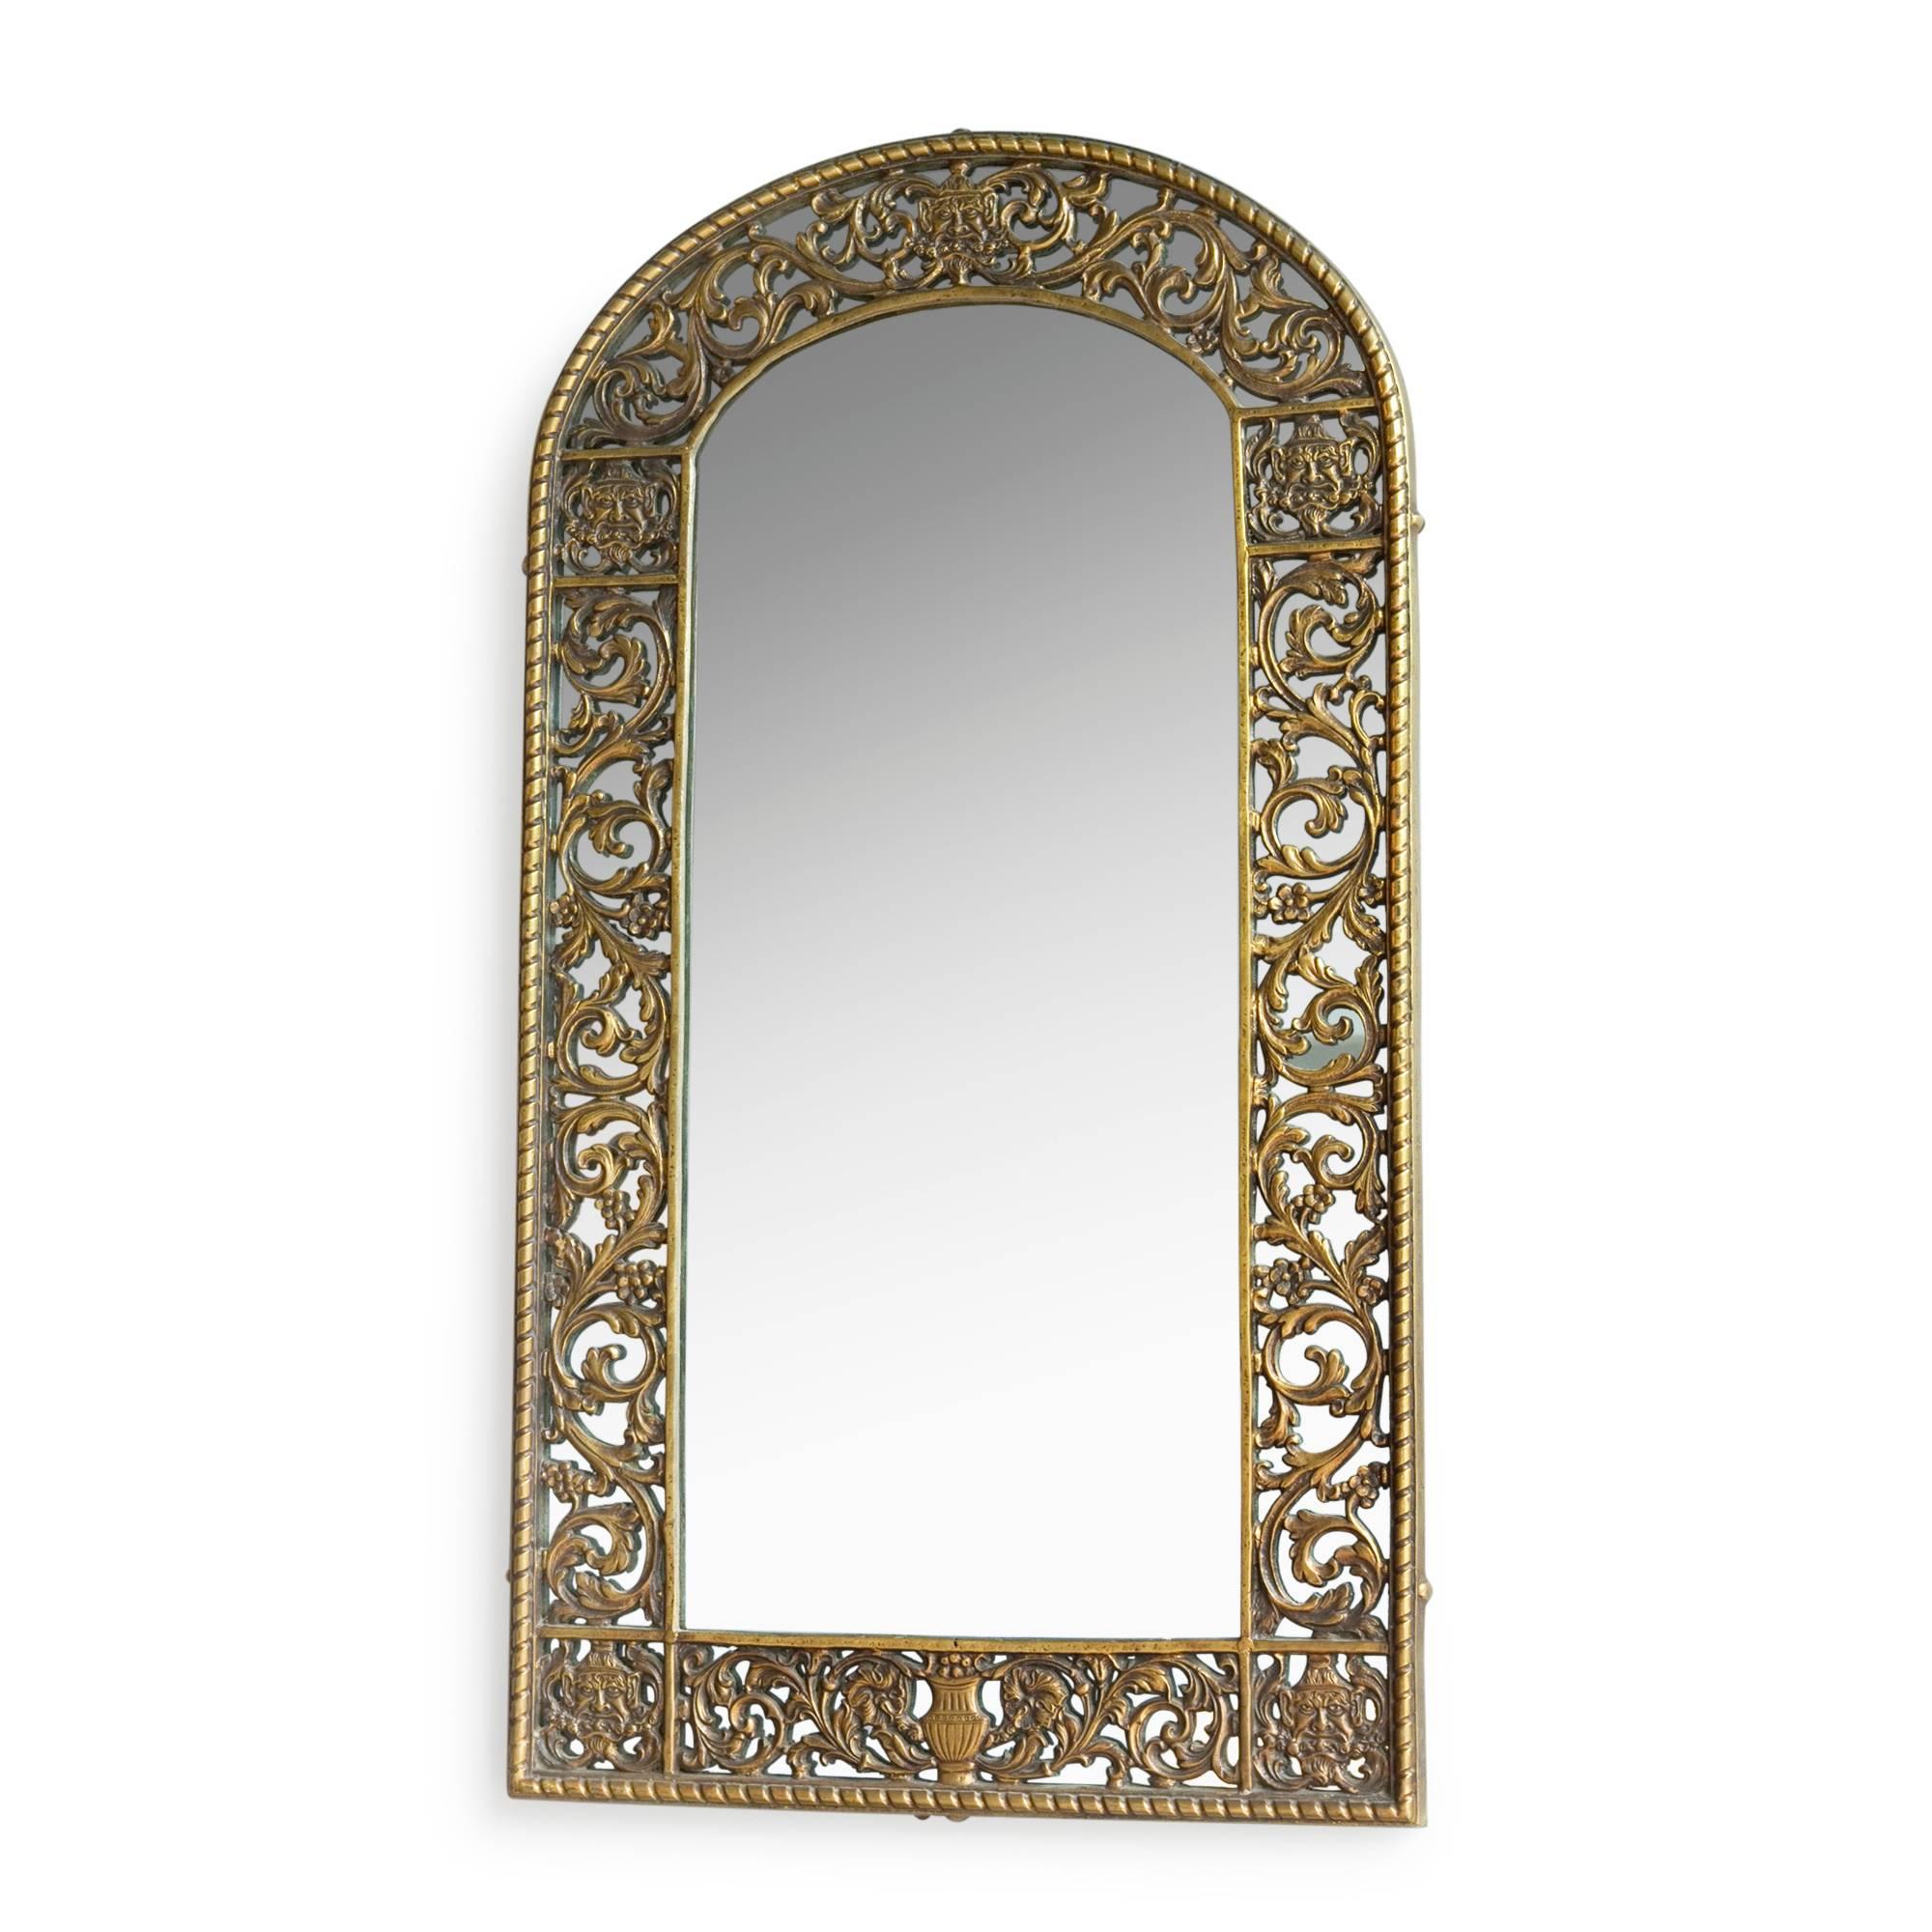 Cast bronze arched top foliate and figural form frame mirror, detailing masks, urns and scrolling leafage, by Oscar Bach, American, 1920s. Measures: Height 34 1/4 in, width 18 3/4 in. (sats)
 